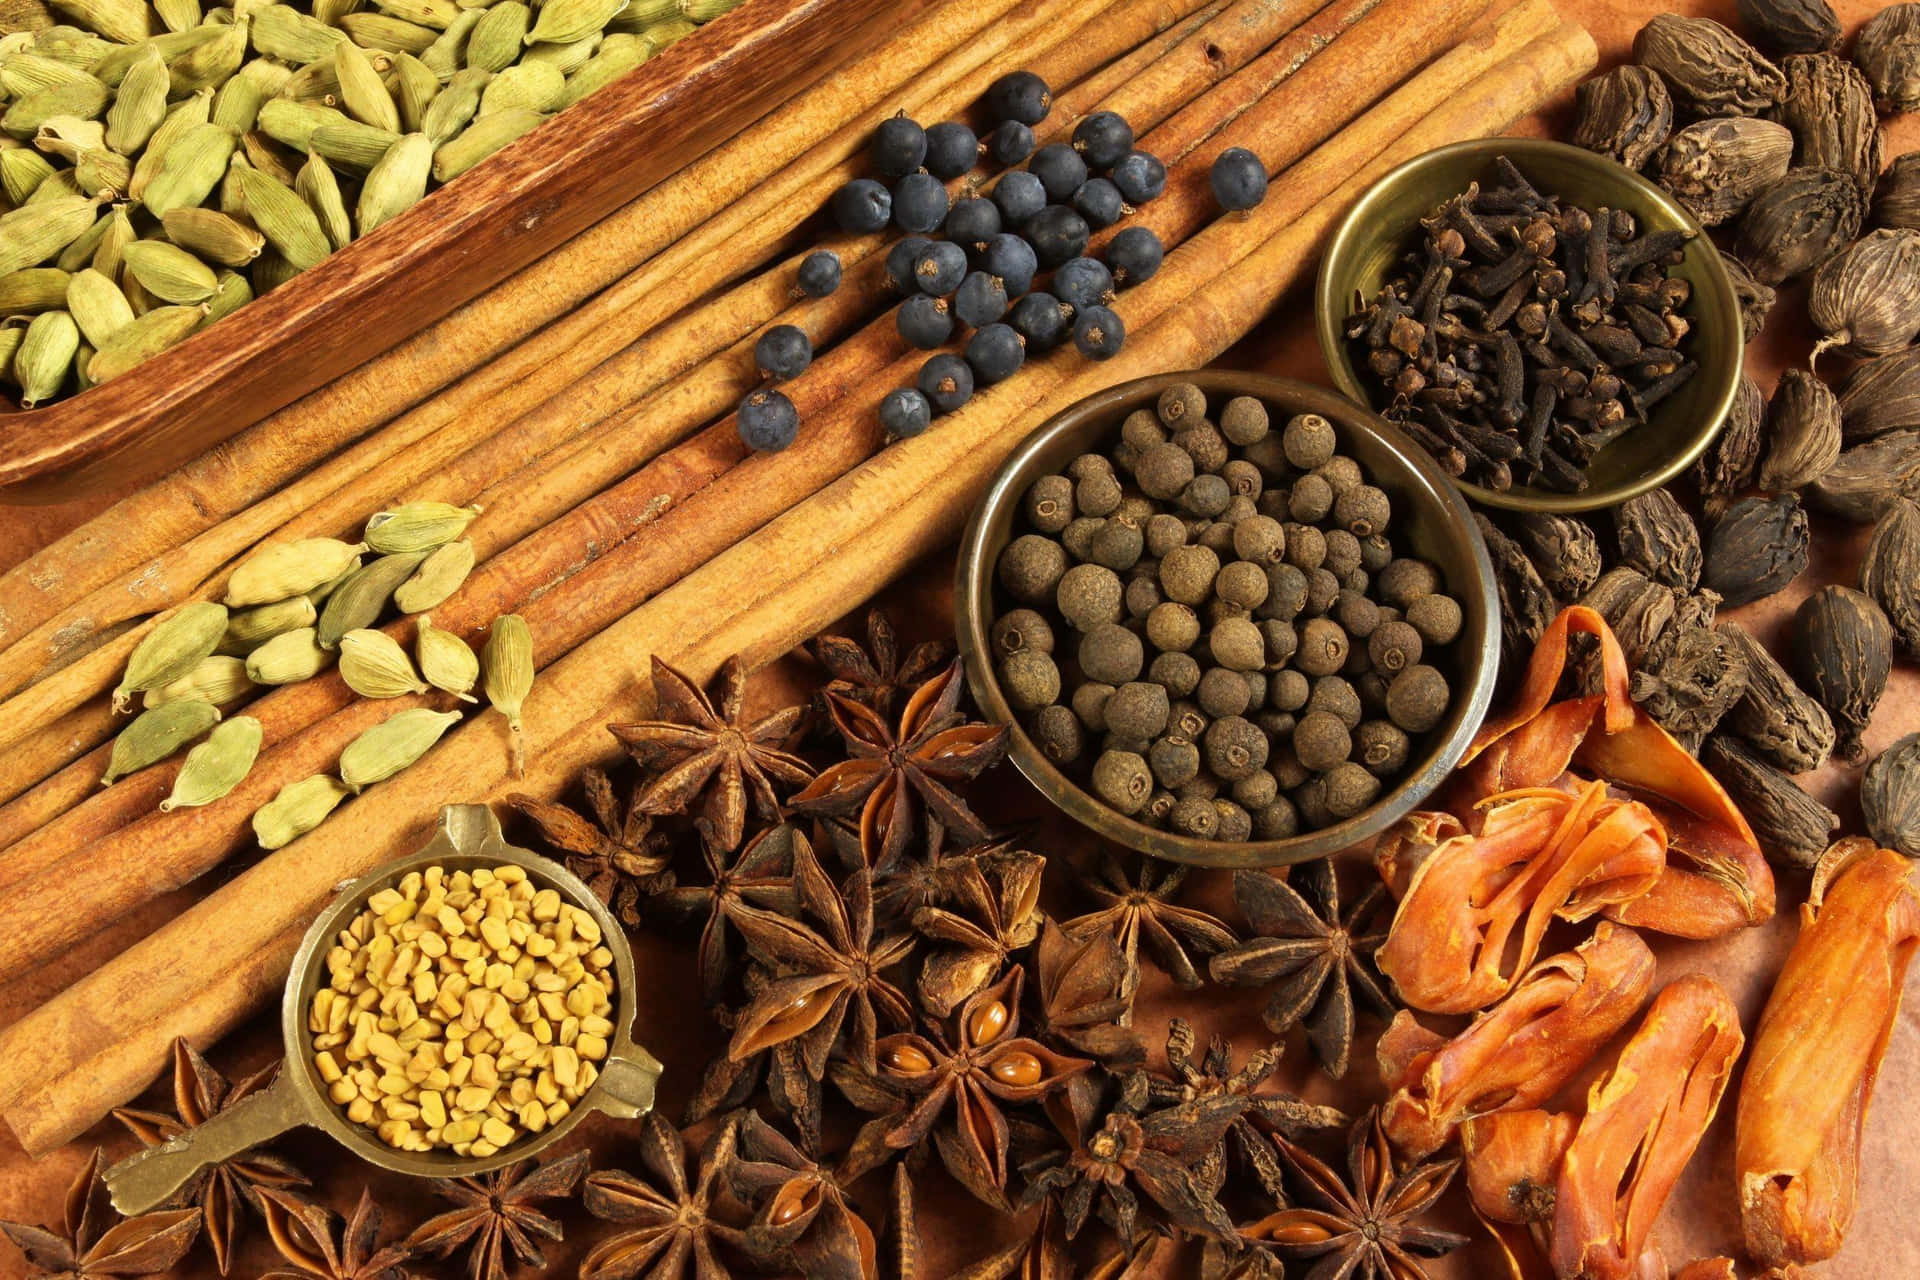 Get inspired with herbs and spices in your kitchen today!